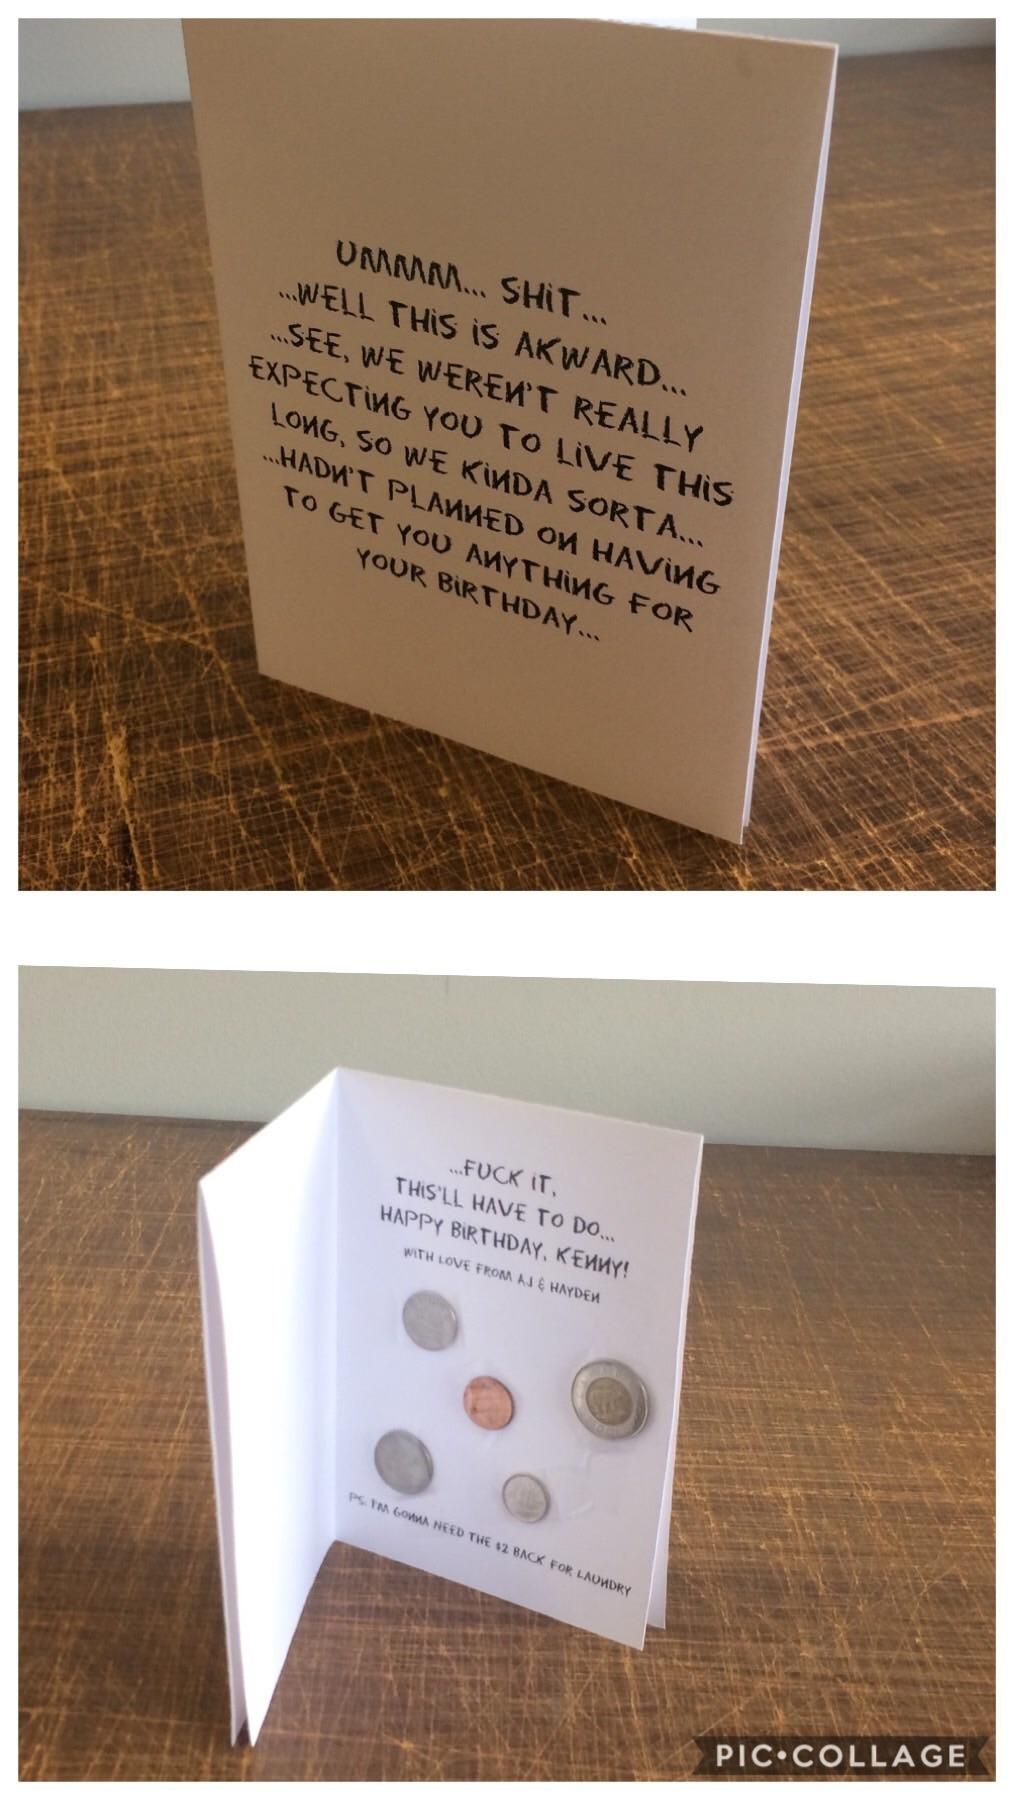 Best friend has a terminal heart condition and has been given X number of years to live more times than we can count. He’s still kicking, and his birthday was on the weekend. So I made him a card.